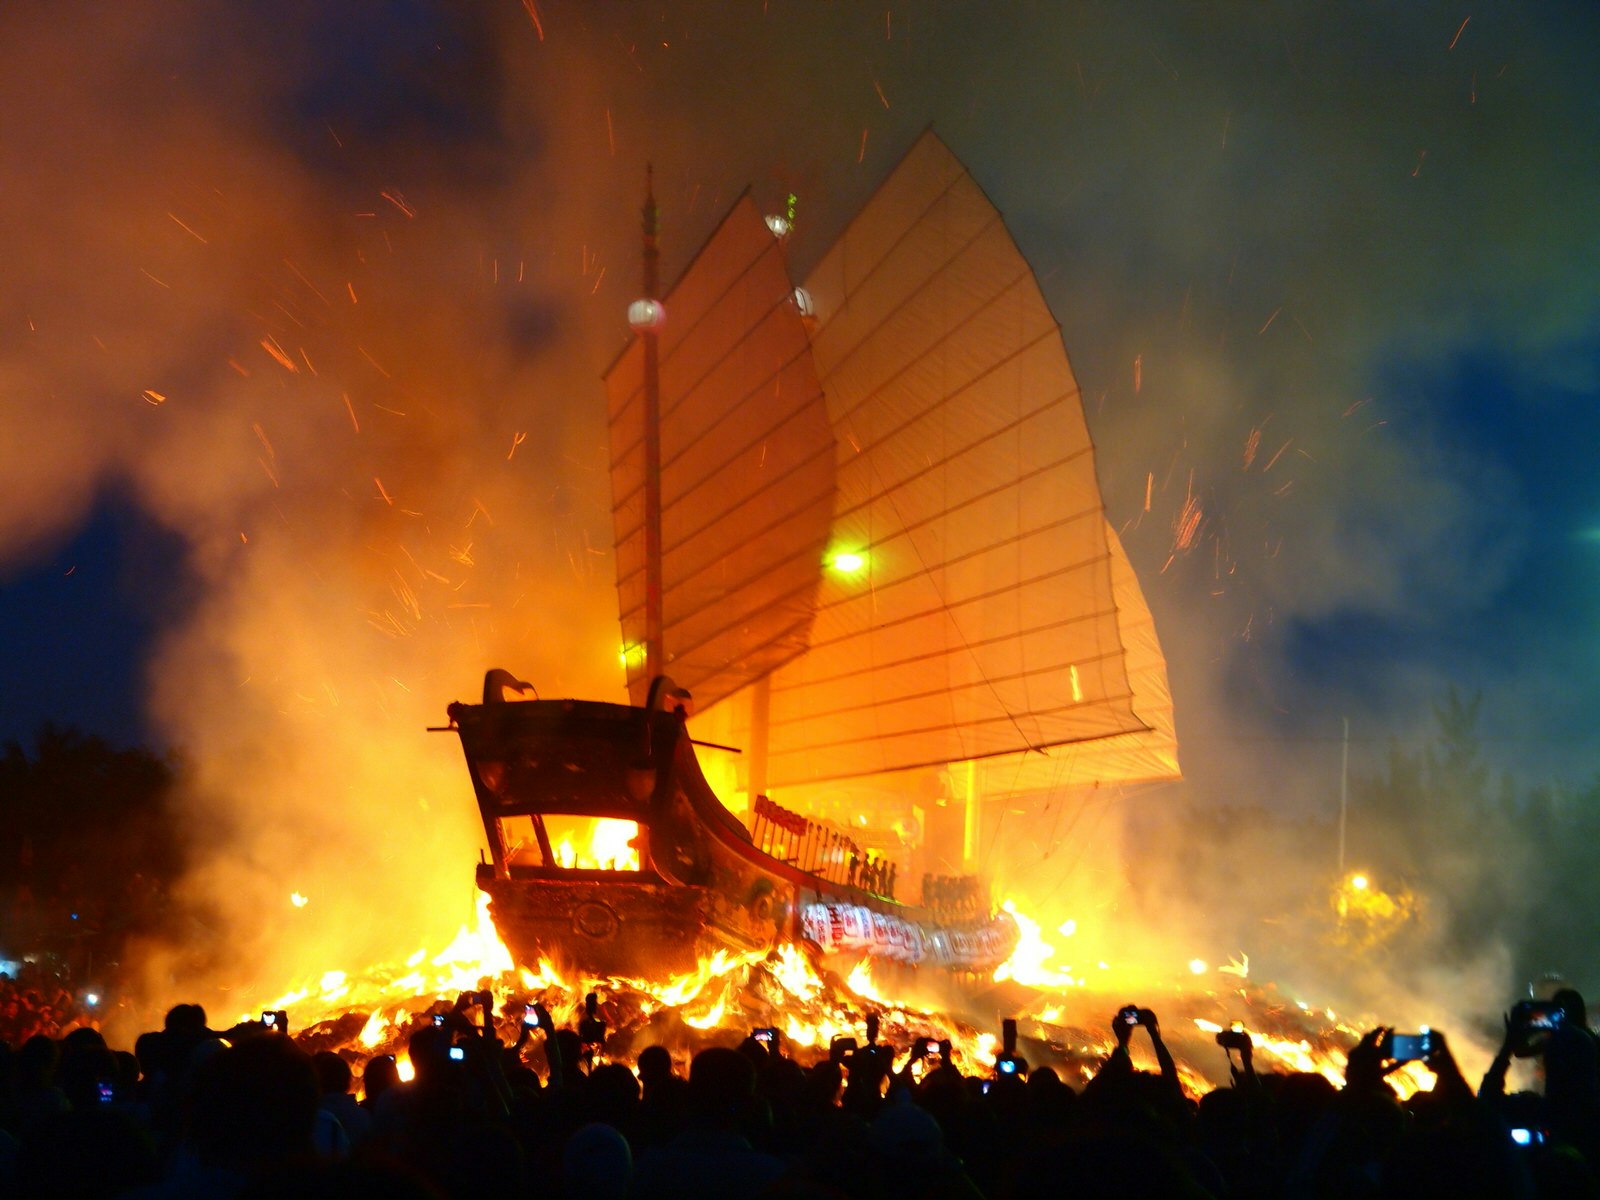 A huge boat with junk sails is set aflame while onlookers hold their phones up to capture the moment. The spectacular Boat Burning Festival takes place around southern Taiwan each autumn to banish demons © 123Nelson / Shutterstock